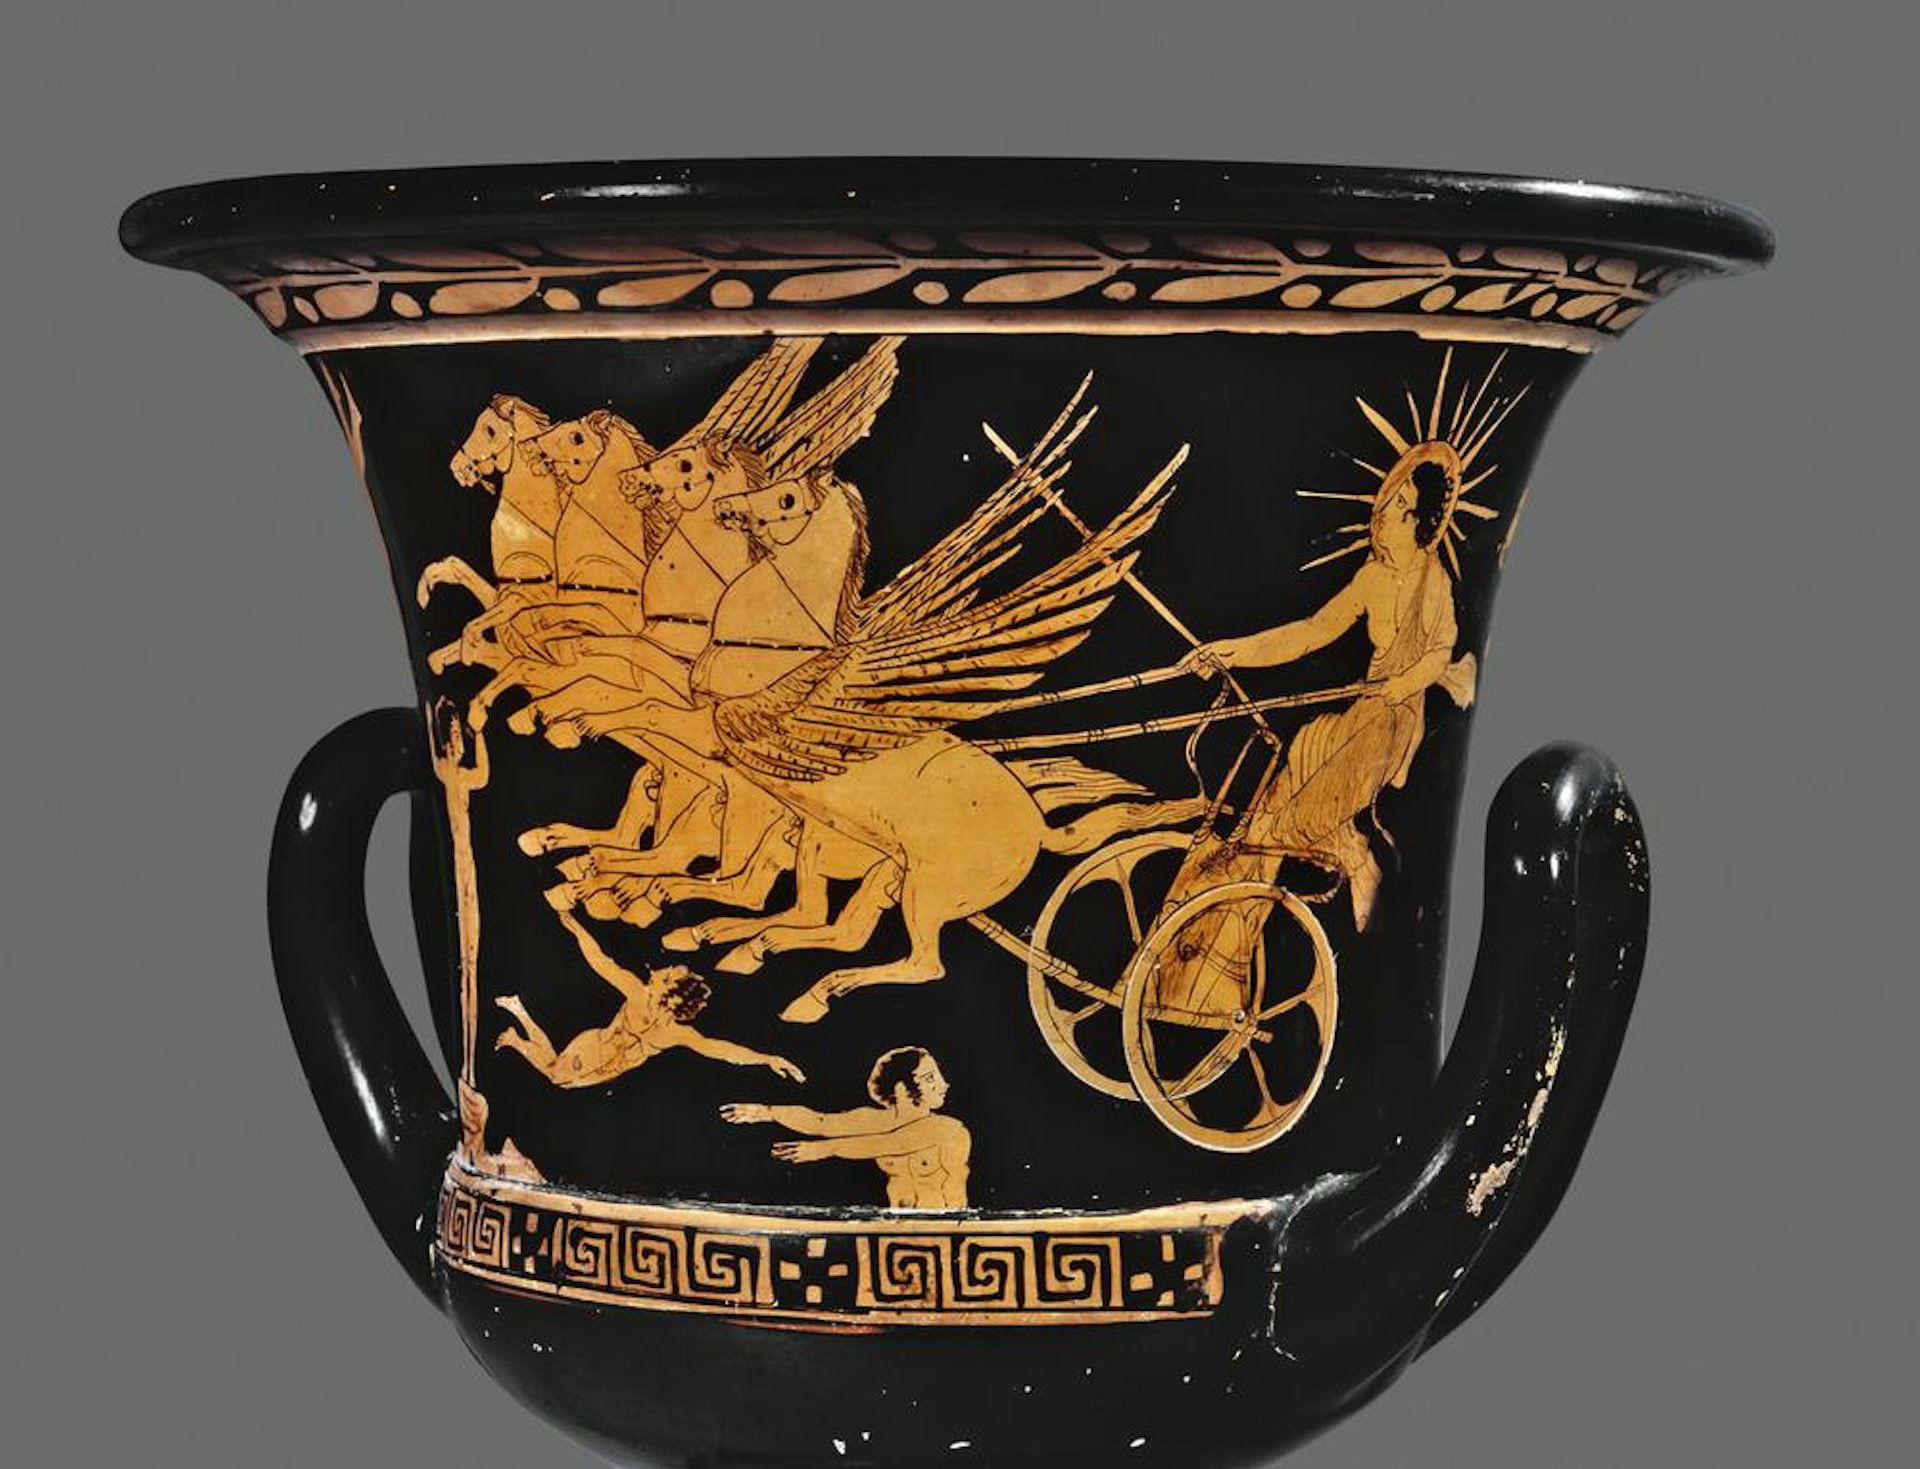 Vase painting of Helios riding his chariot out of ocean